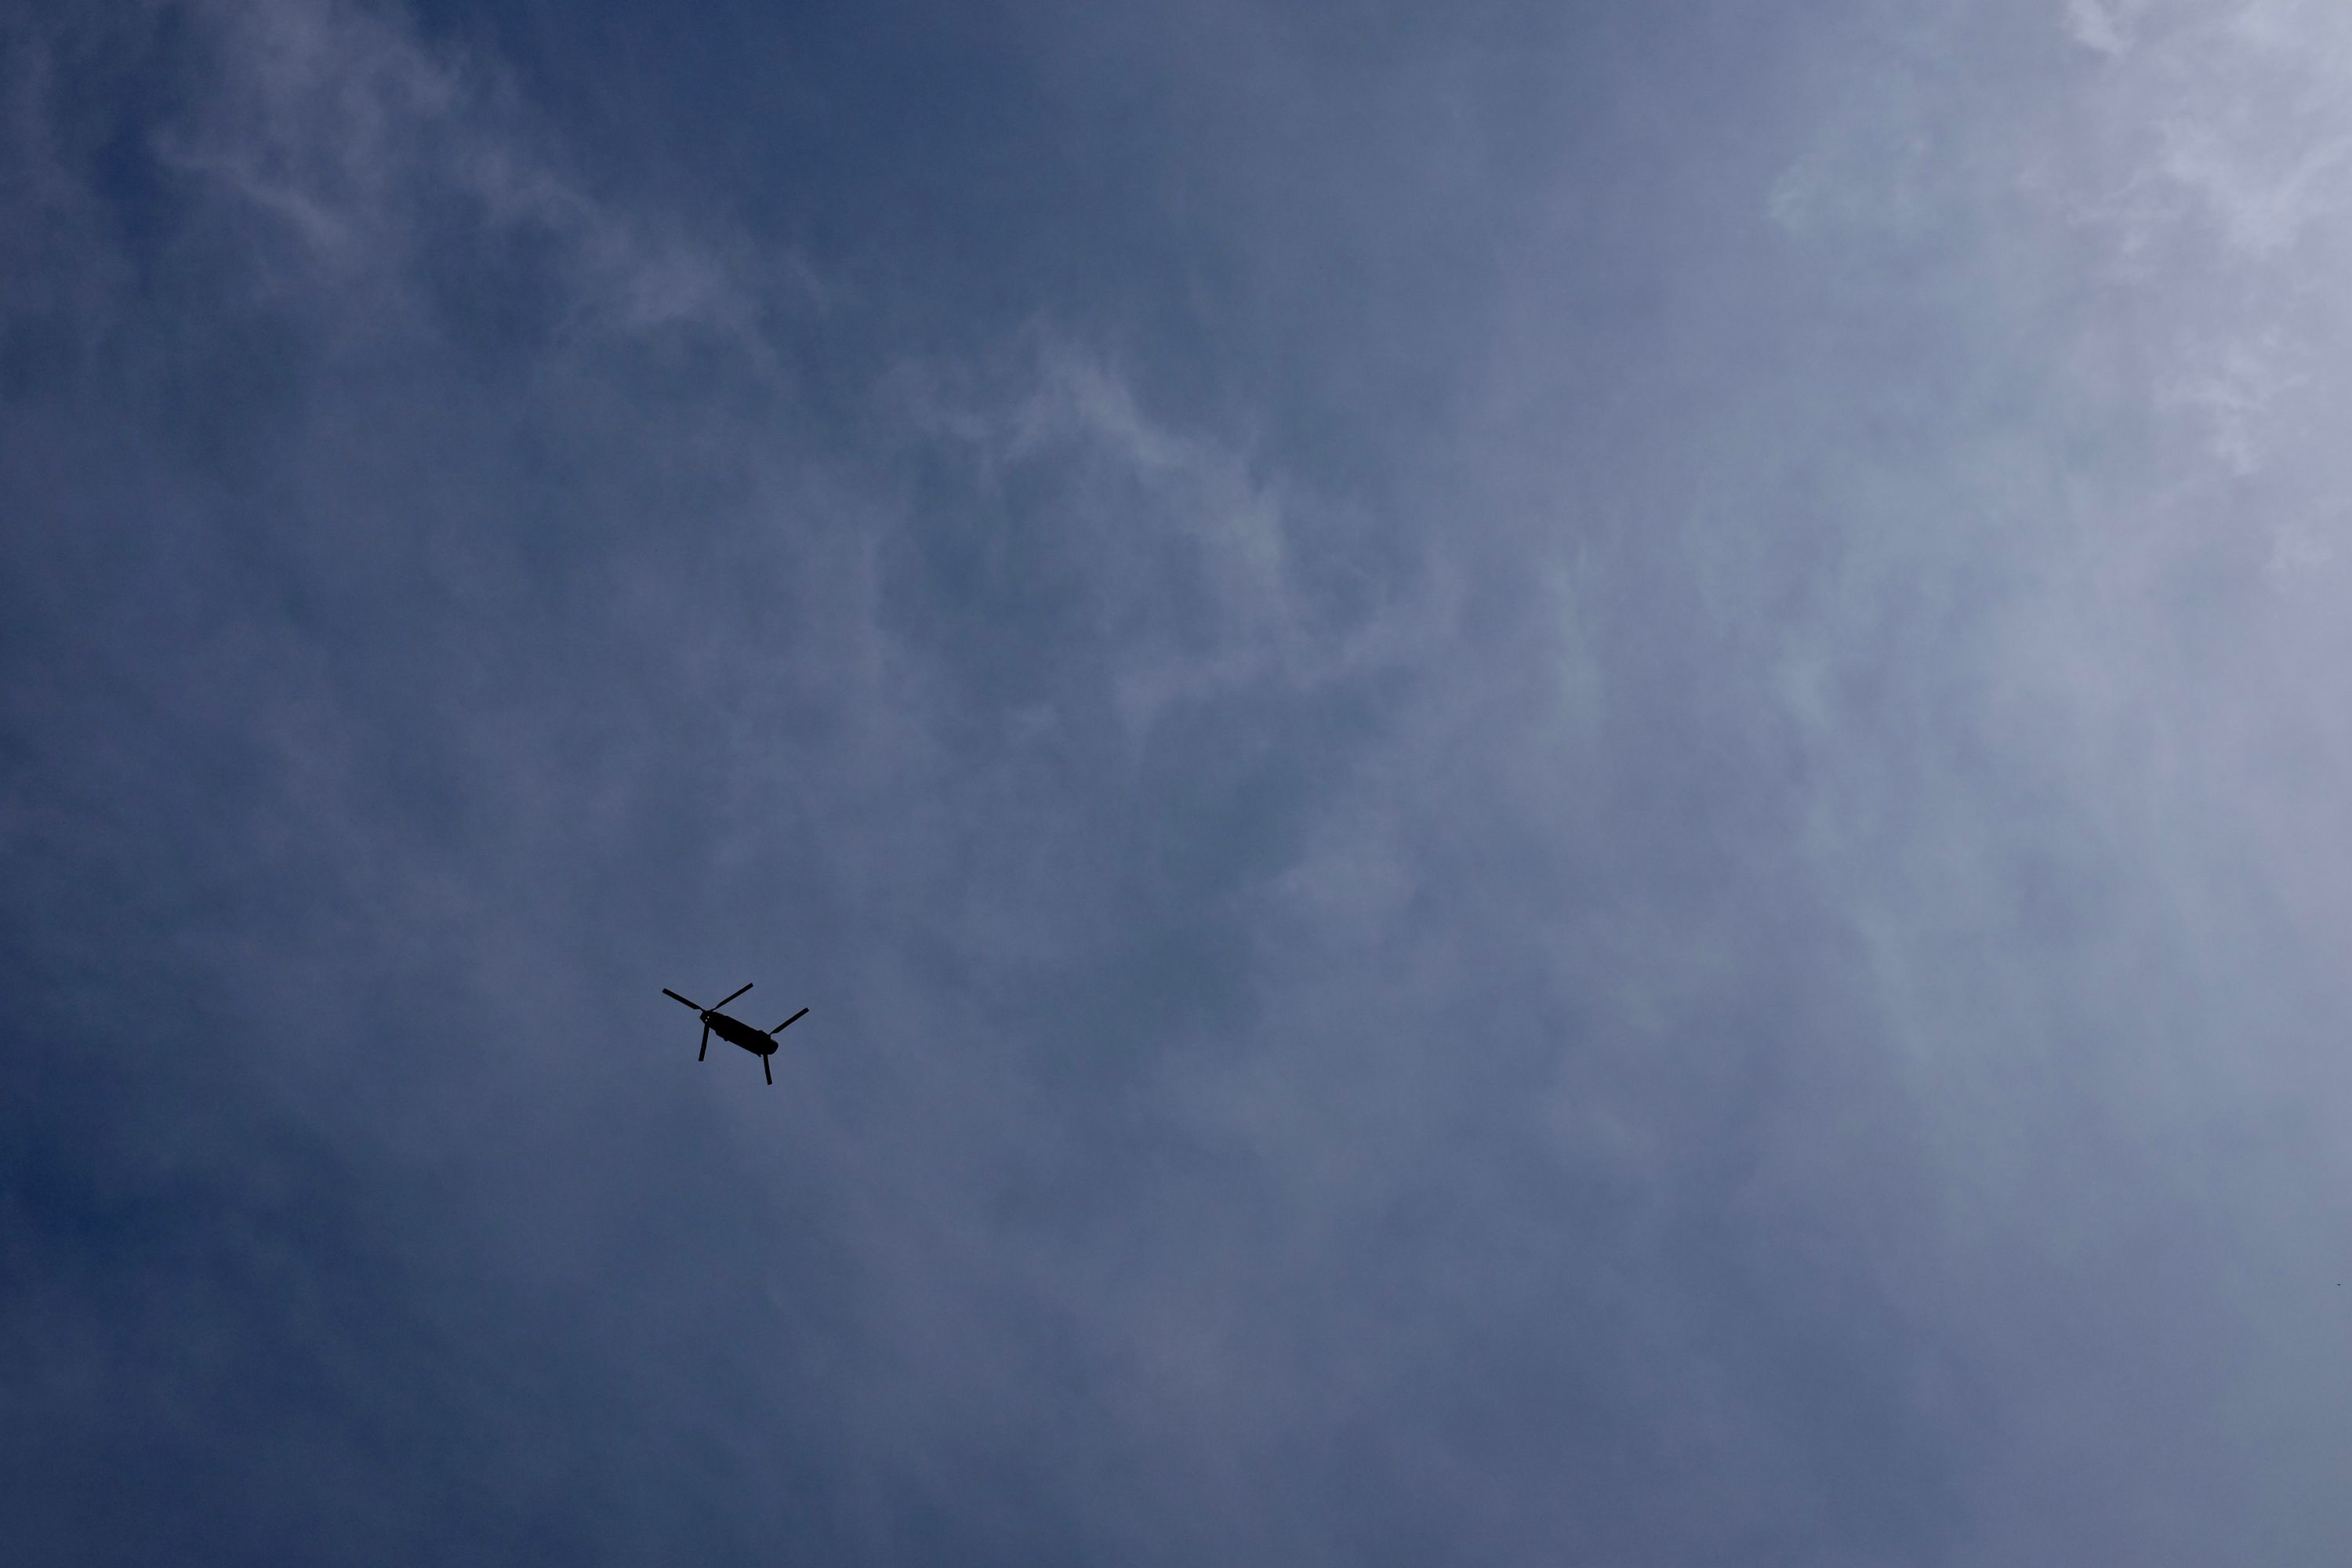 A Chinook military helicopter in the sky.